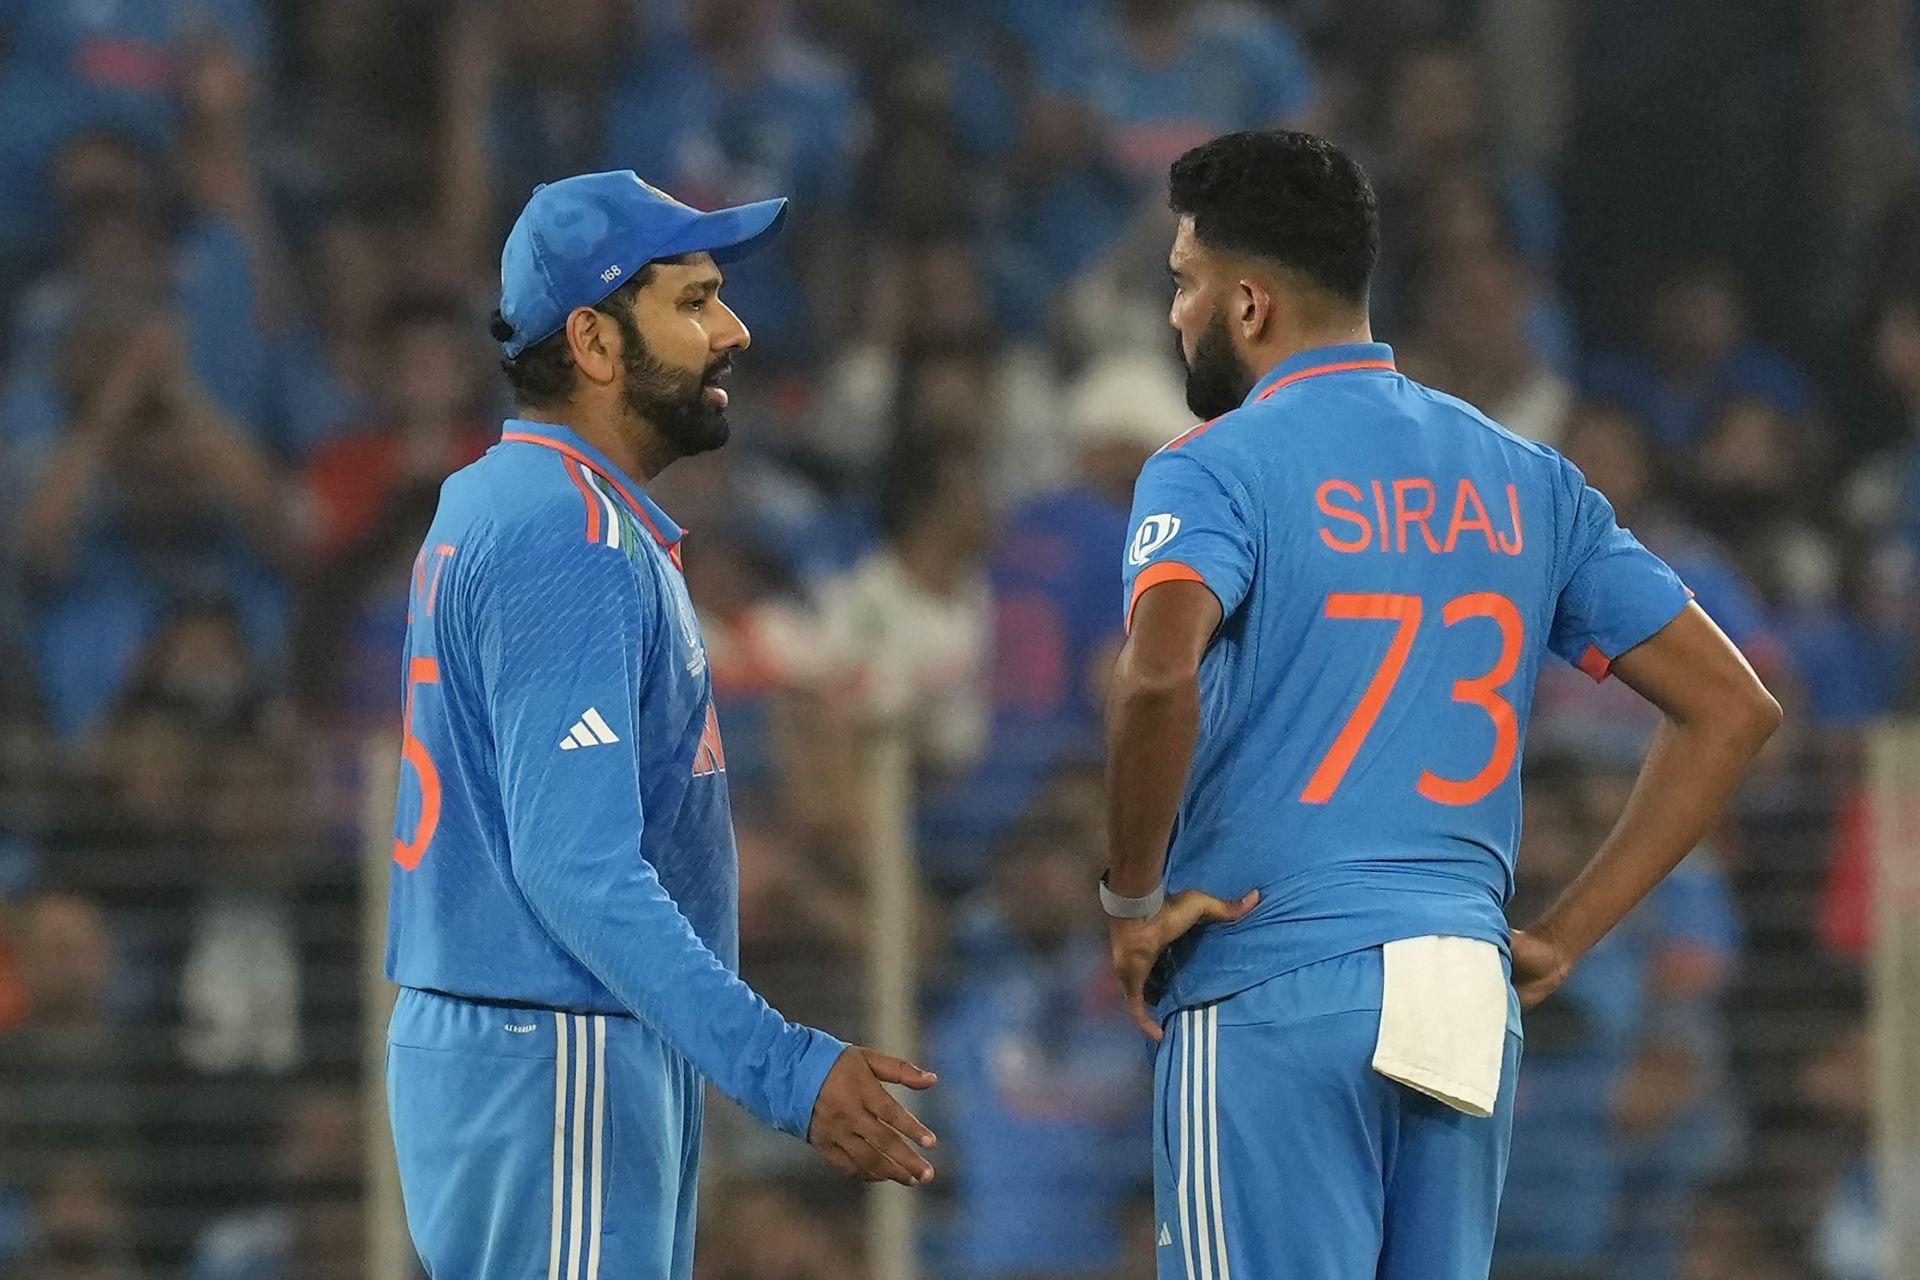 Mohammed Siraj [right] had a disappointing World Cup campaign